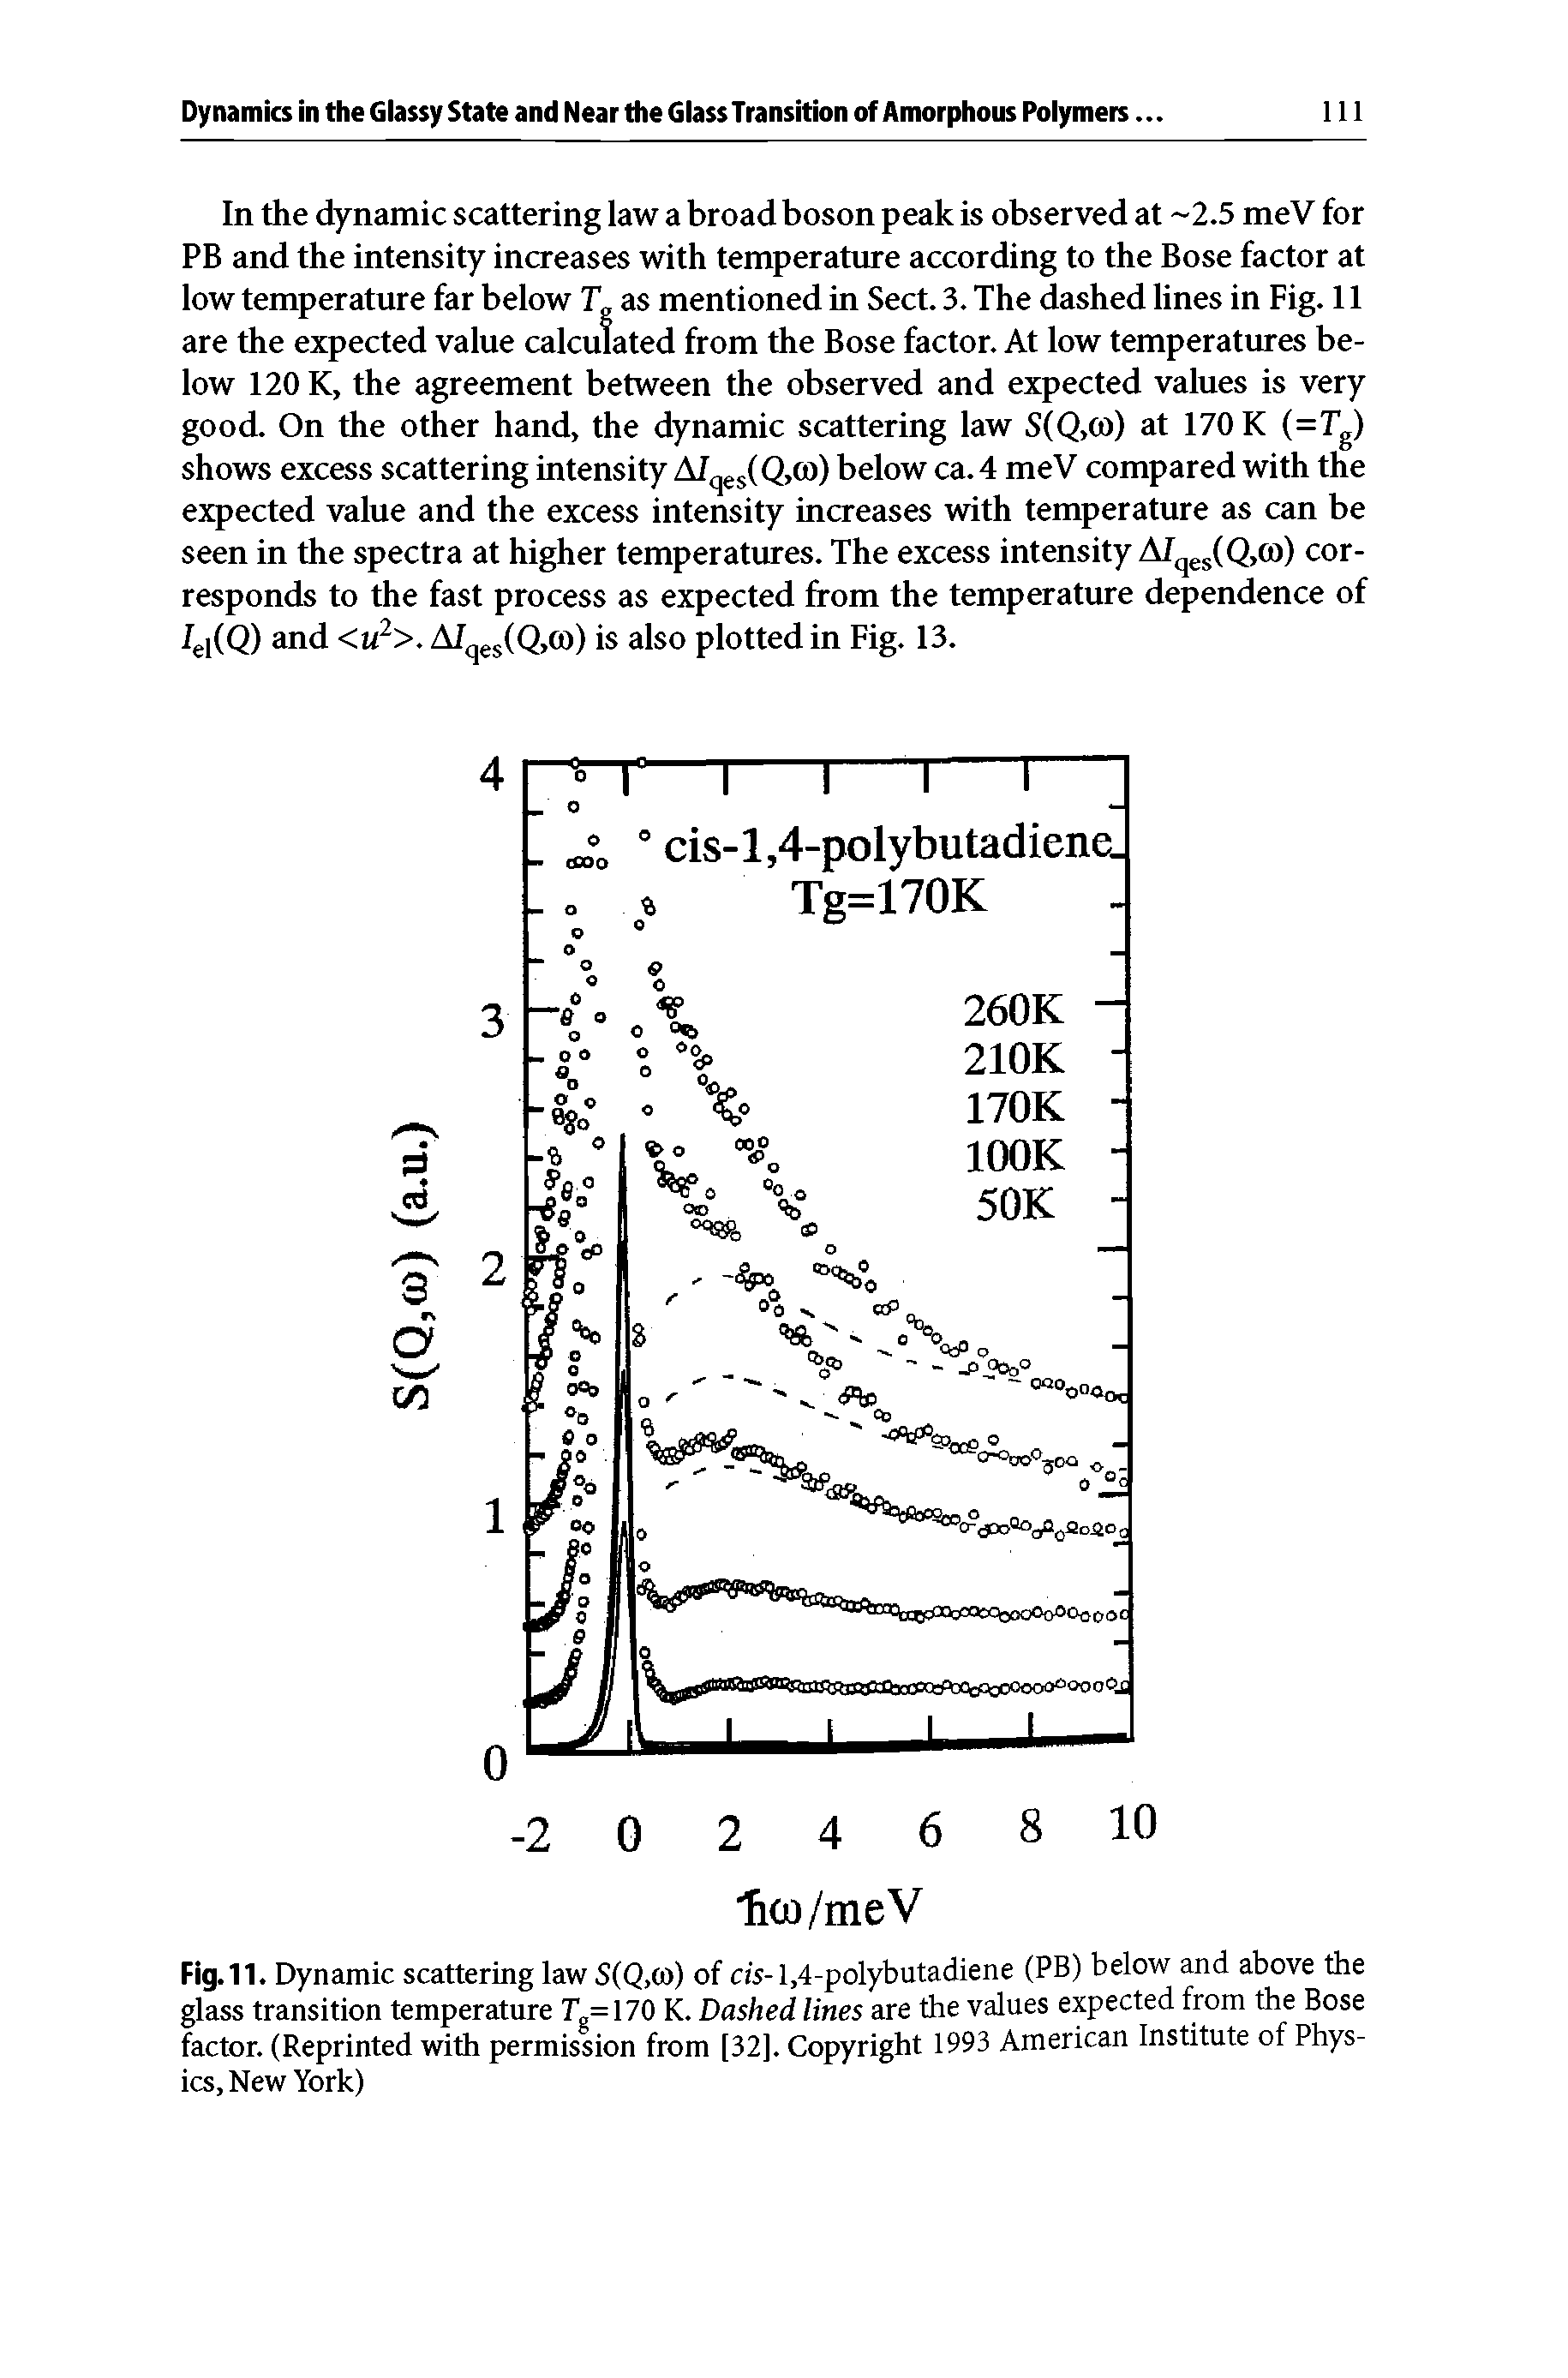 Fig.11. Dynamic scattering law S(Q,co) of cis-1,4-polybutadiene (PB) below and above the glass transition temperature rg=170 K. Dashed lines are the values expected from the Bose factor. (Reprinted with permission from [32]. Copyright 1993 American Institute of Physics, New York)...